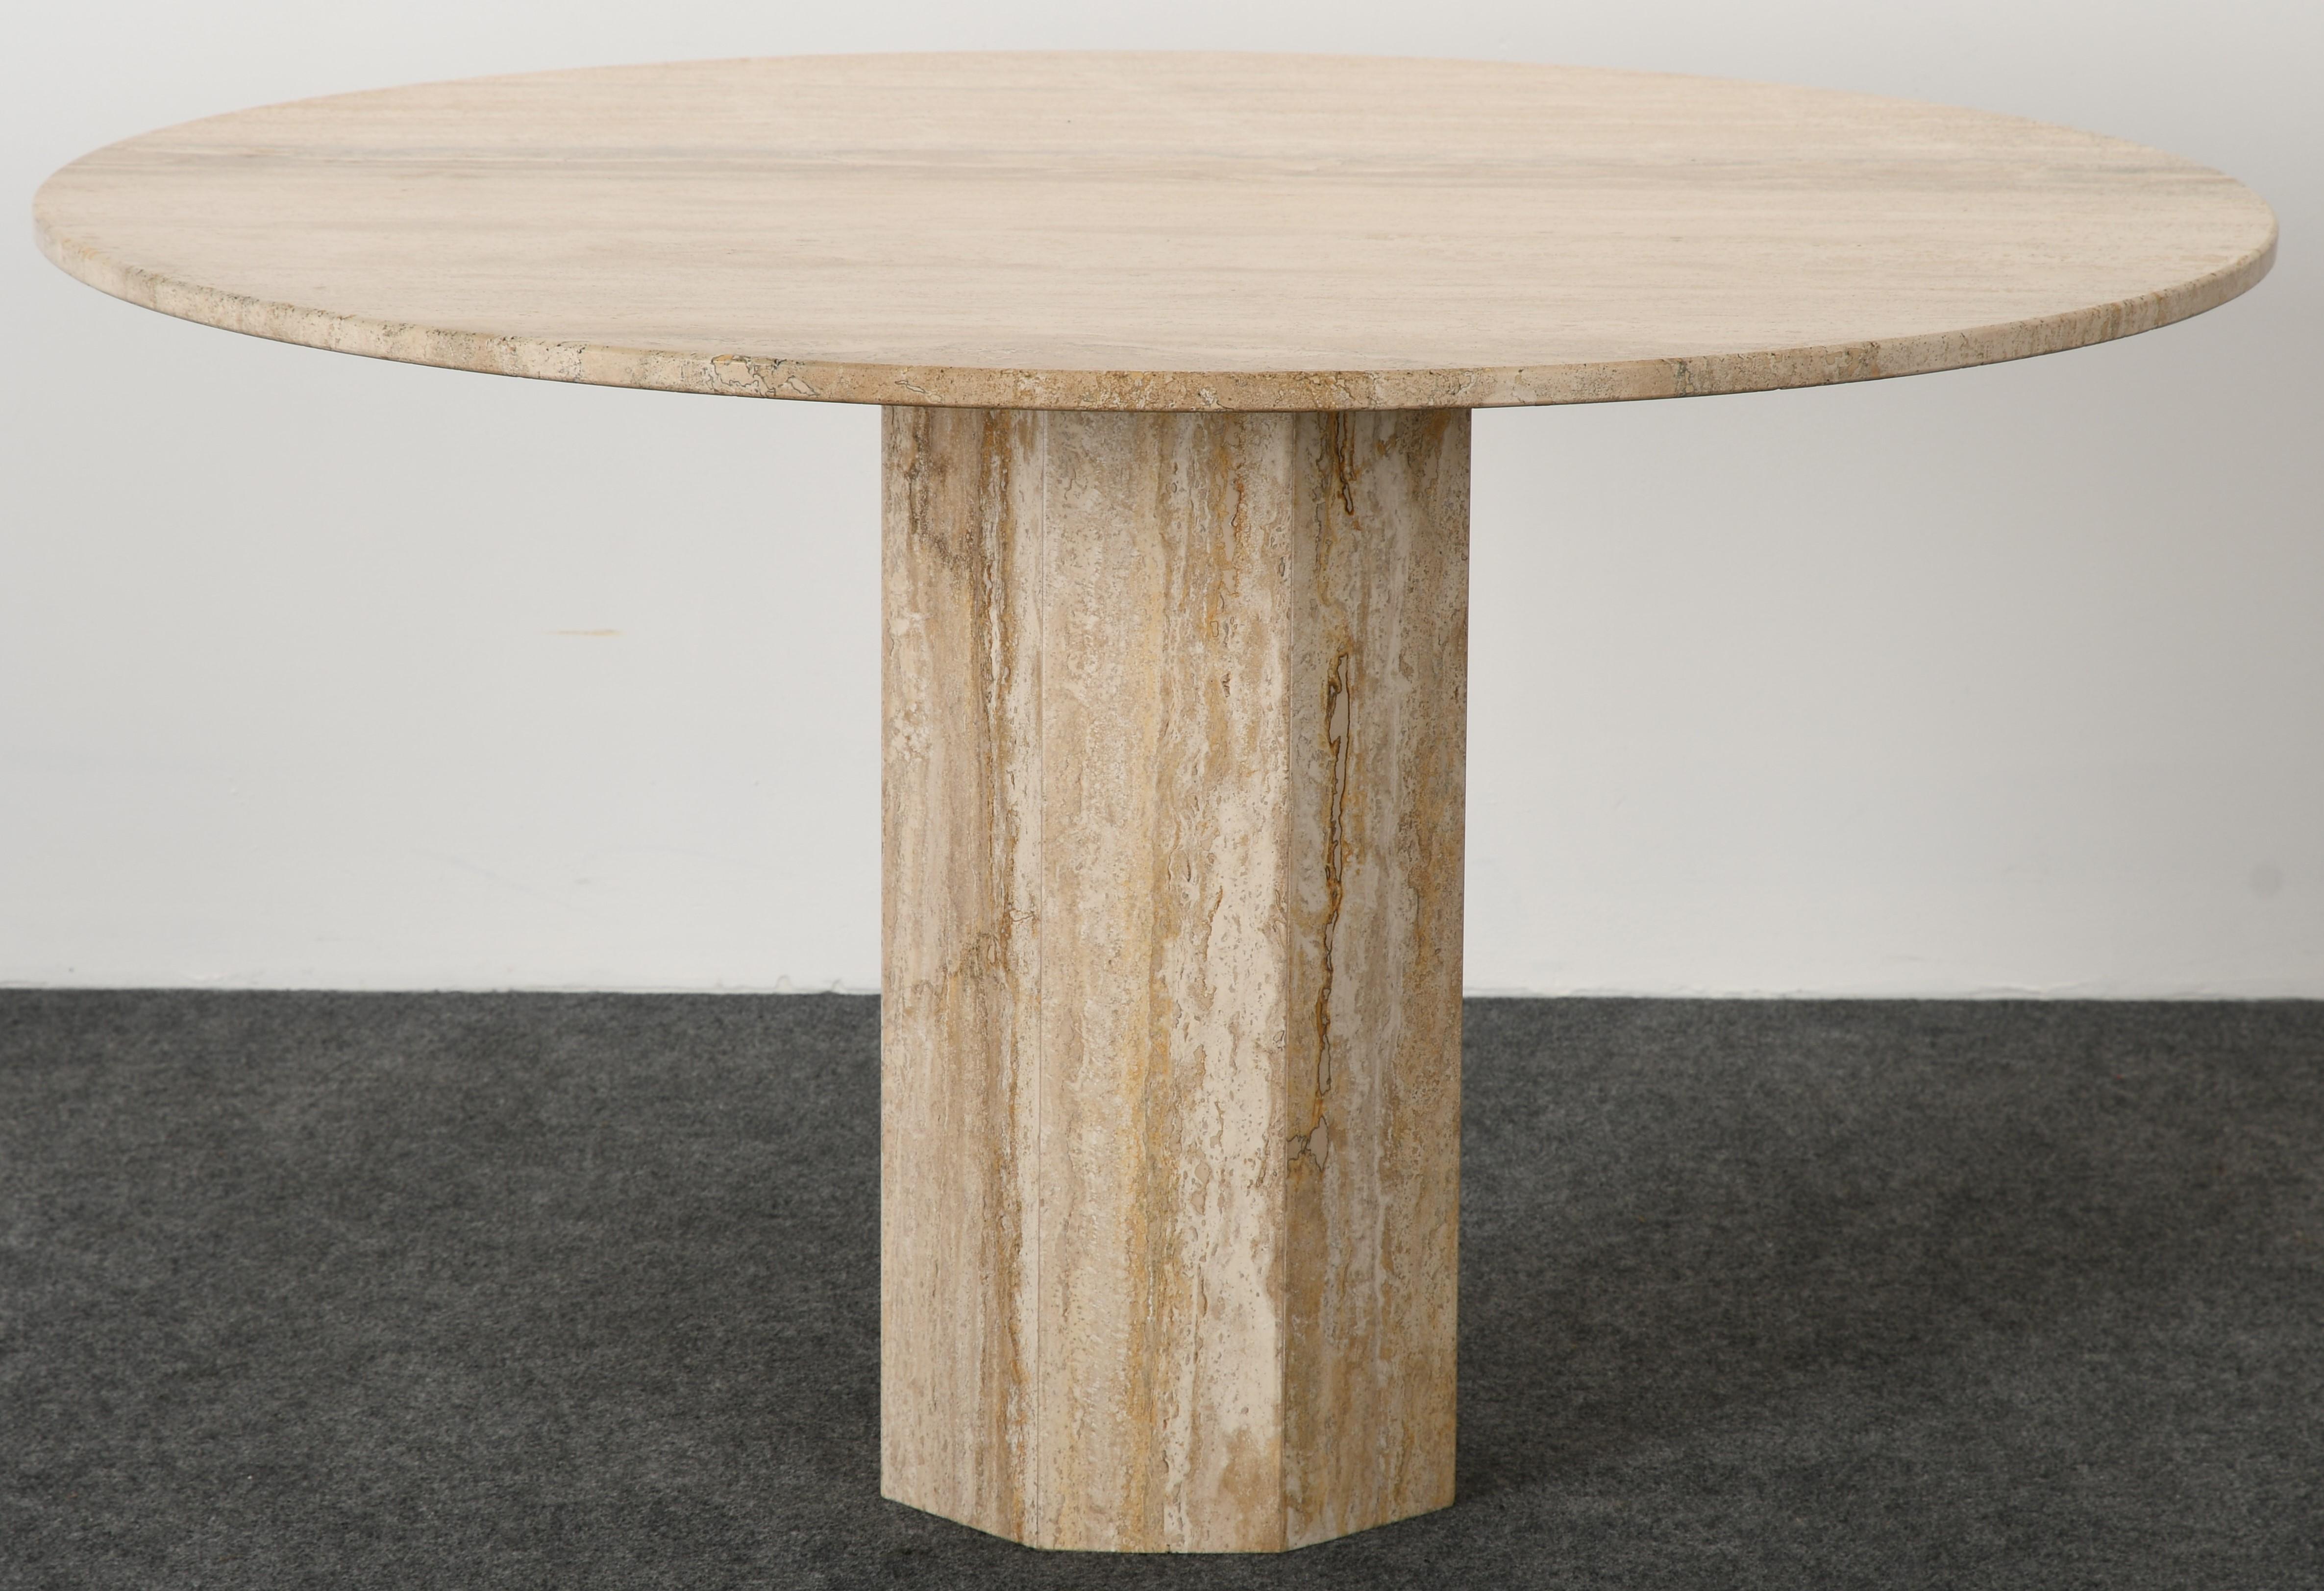 A stunning round Roche Bobois style travertine marble dining table with an octagon base. This marble table has beautiful veining throughout. A great piece for a Minimalist interior. In good condition with age-appropriate wear having a low gloss